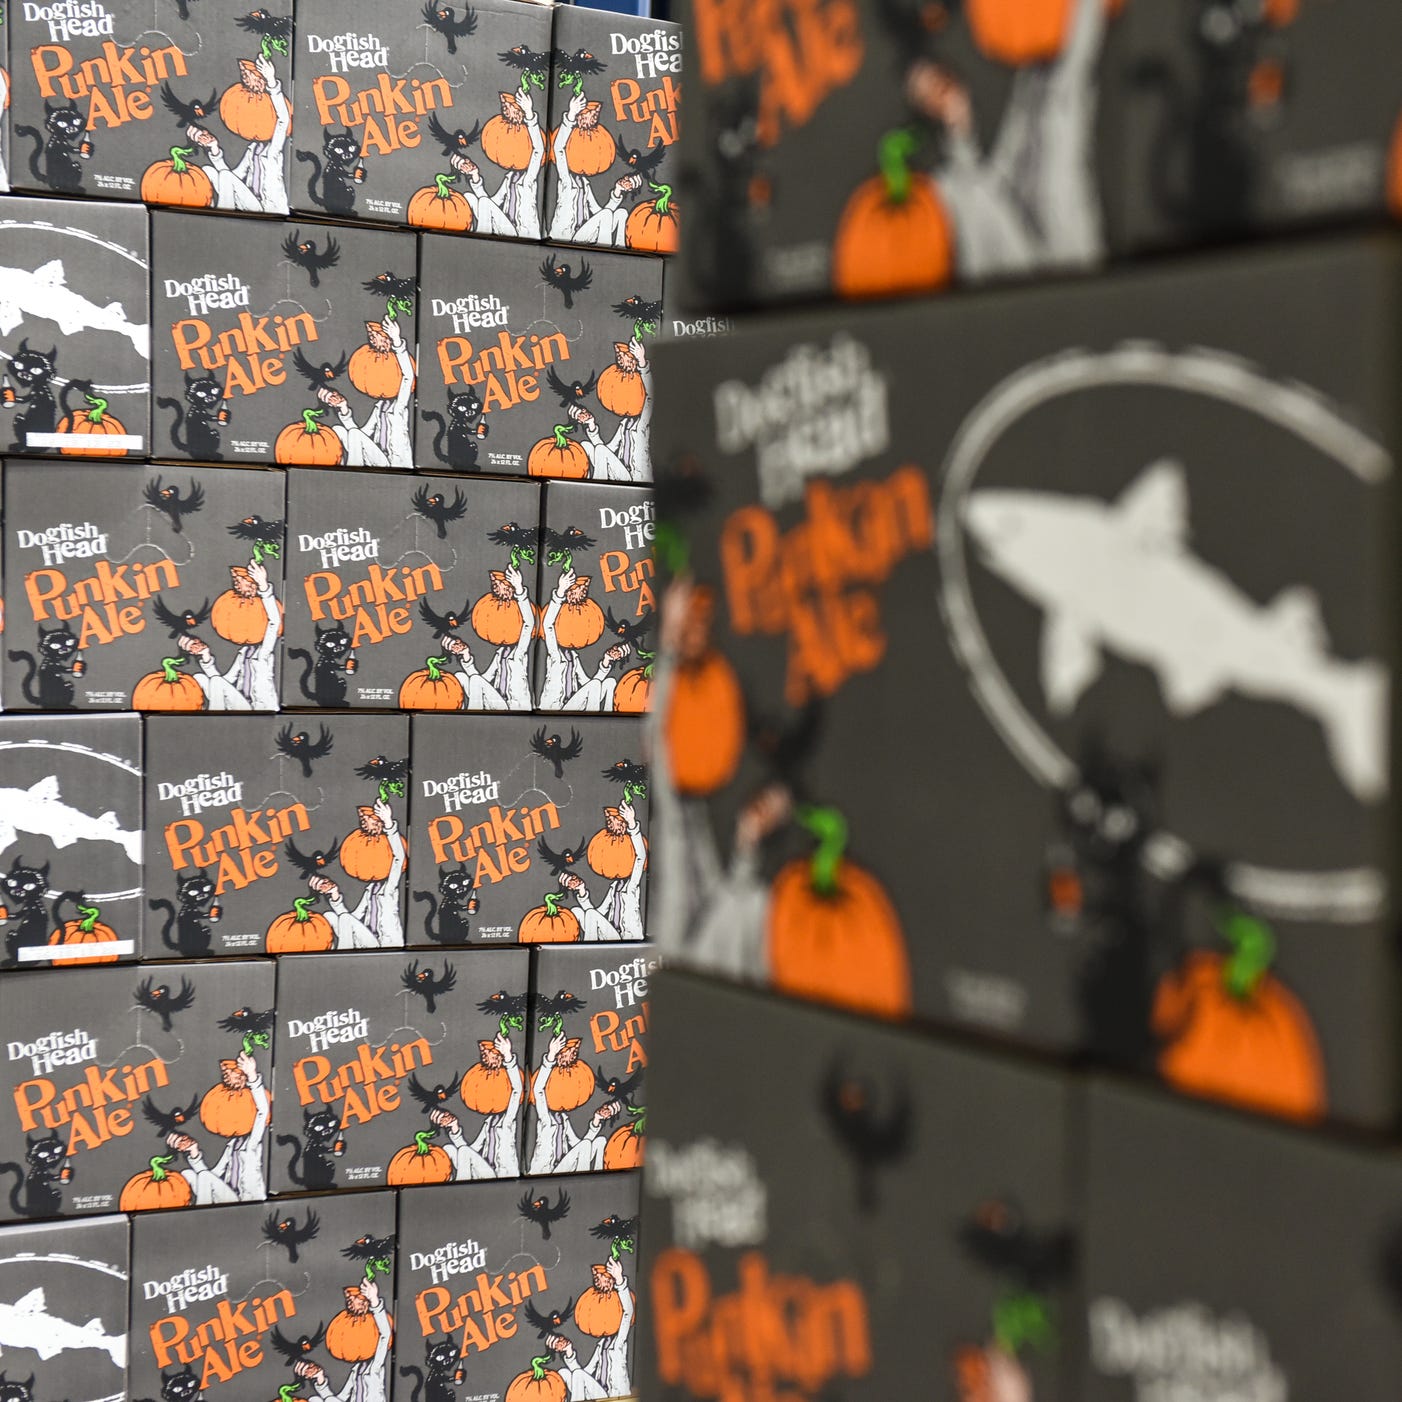 Punkin Ale, released in August, is one of Dogfish Head Craft Brewery's most popular beers.